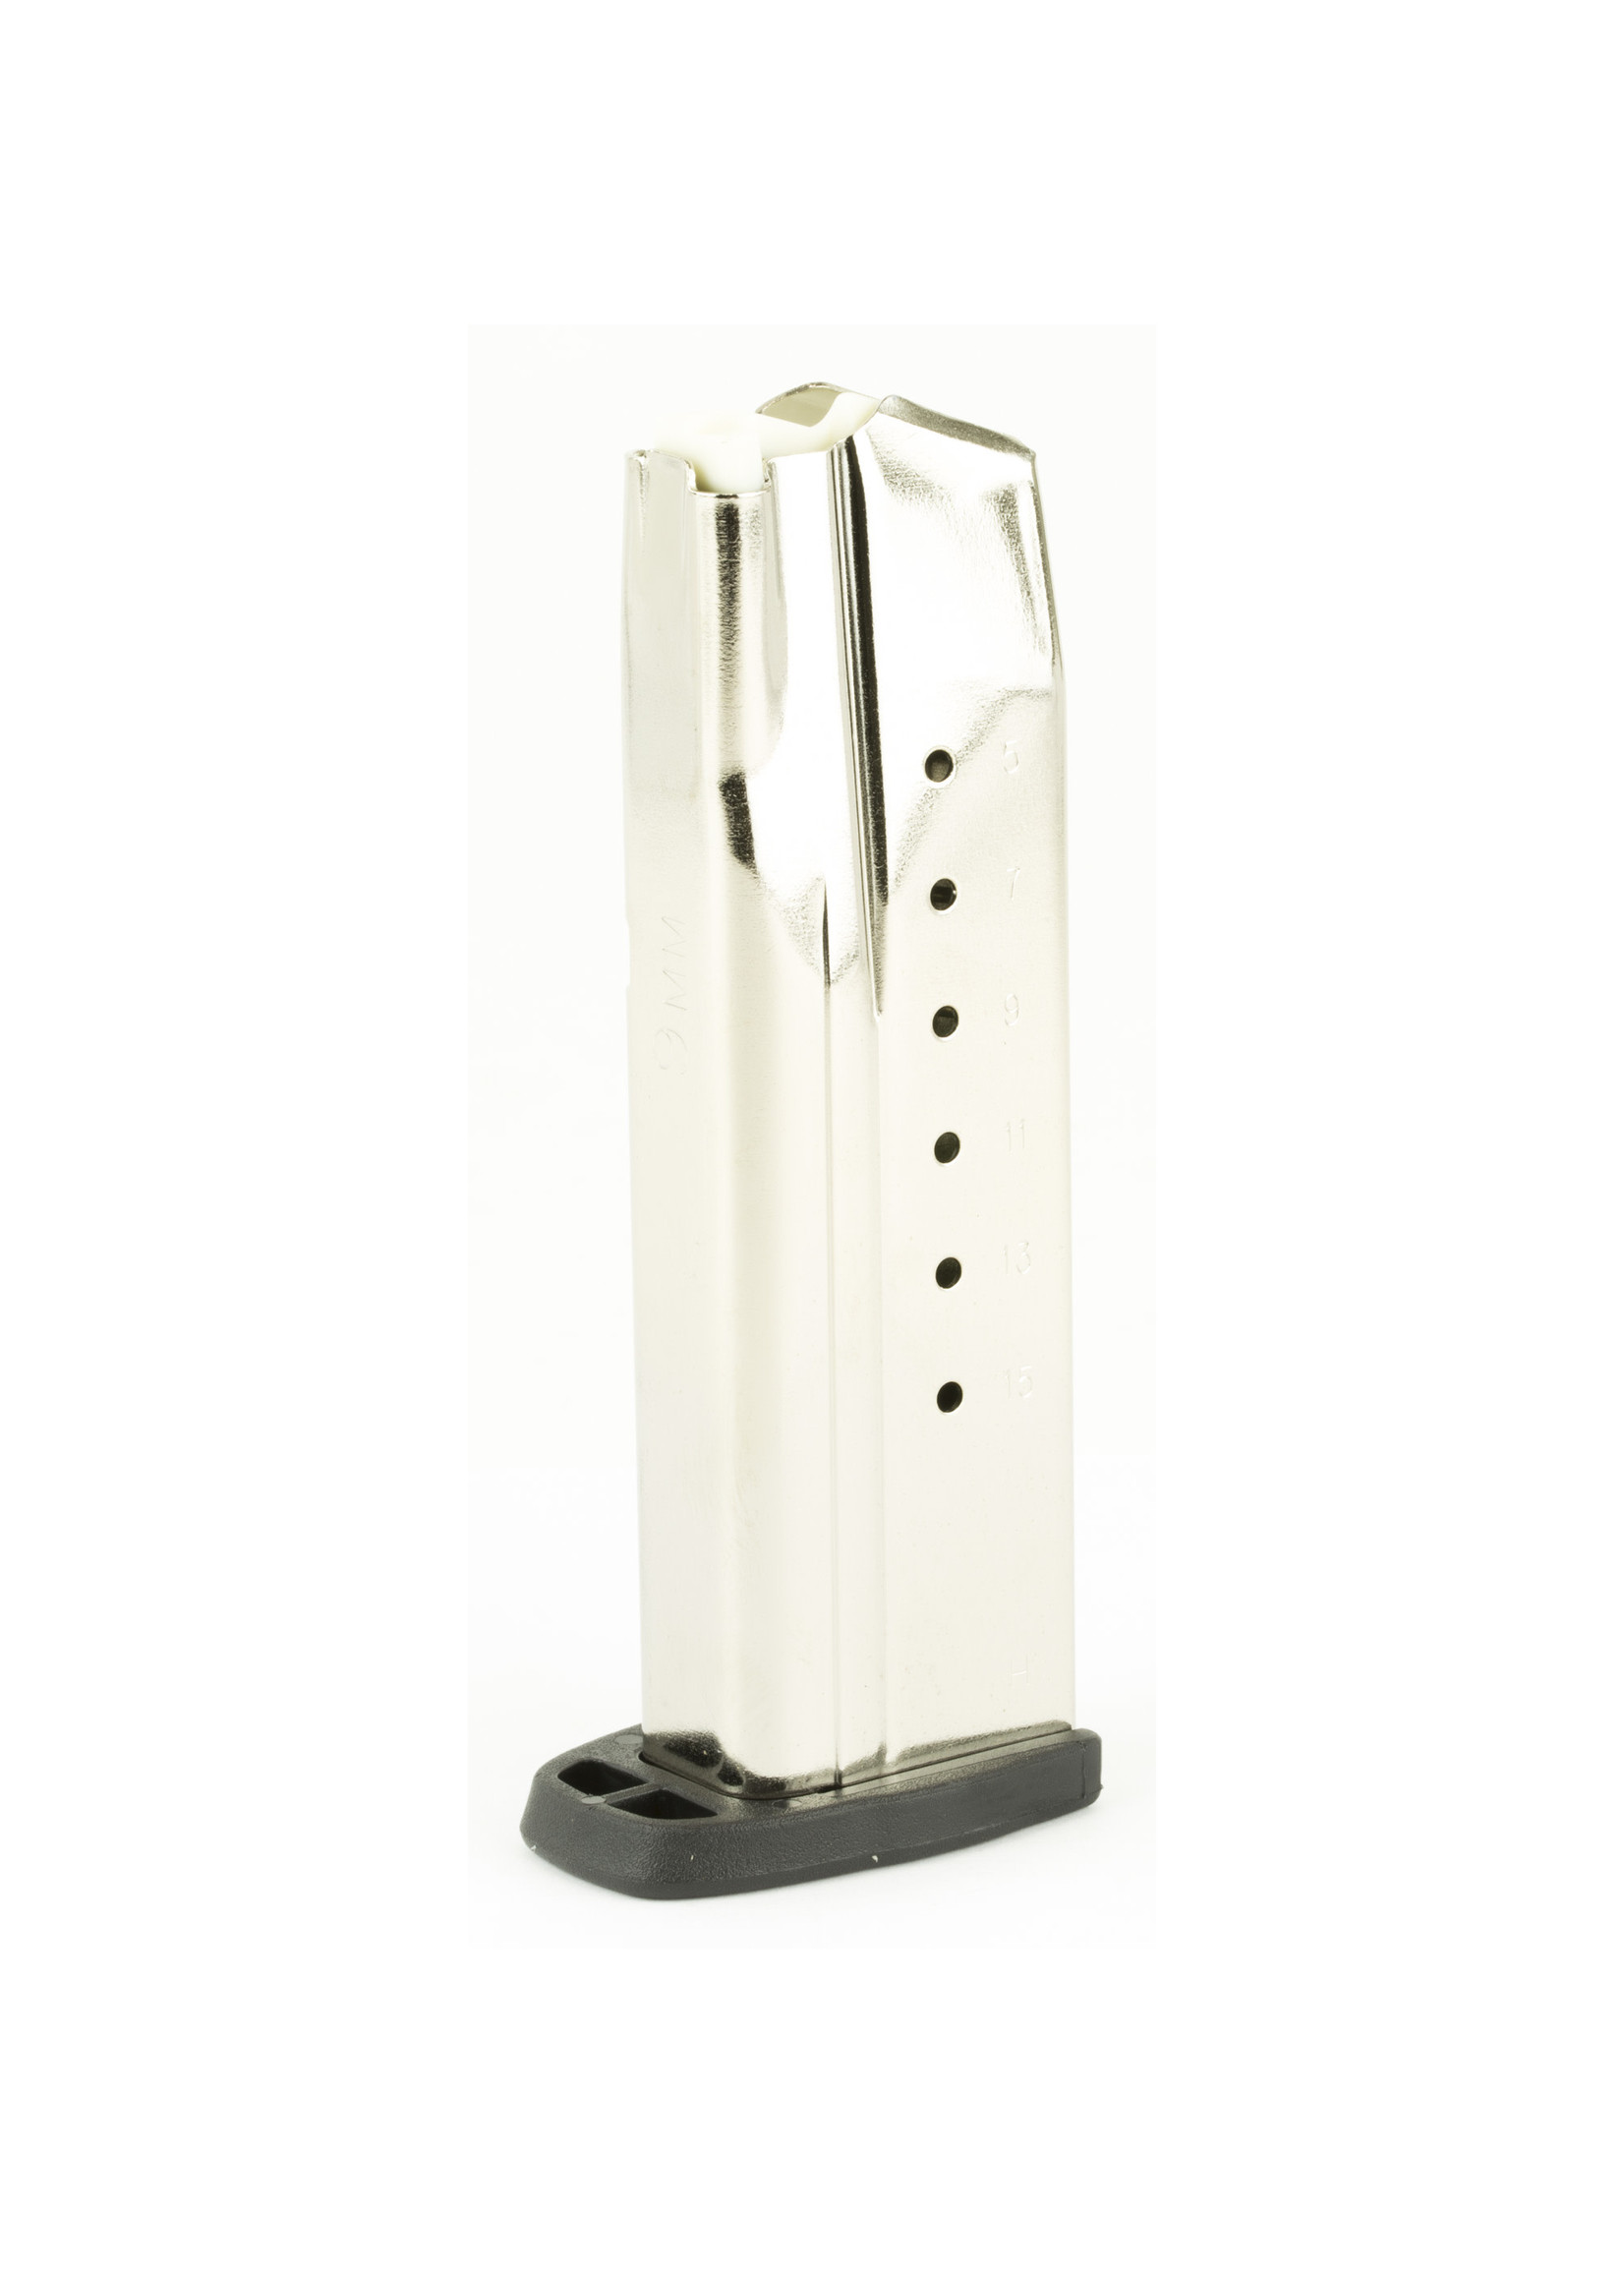 Smith & Wesson Smith & Wesson SD Magazine, 9mm 16Rd. Stainless Steel MFG# 199250000 UPC#  022188144291